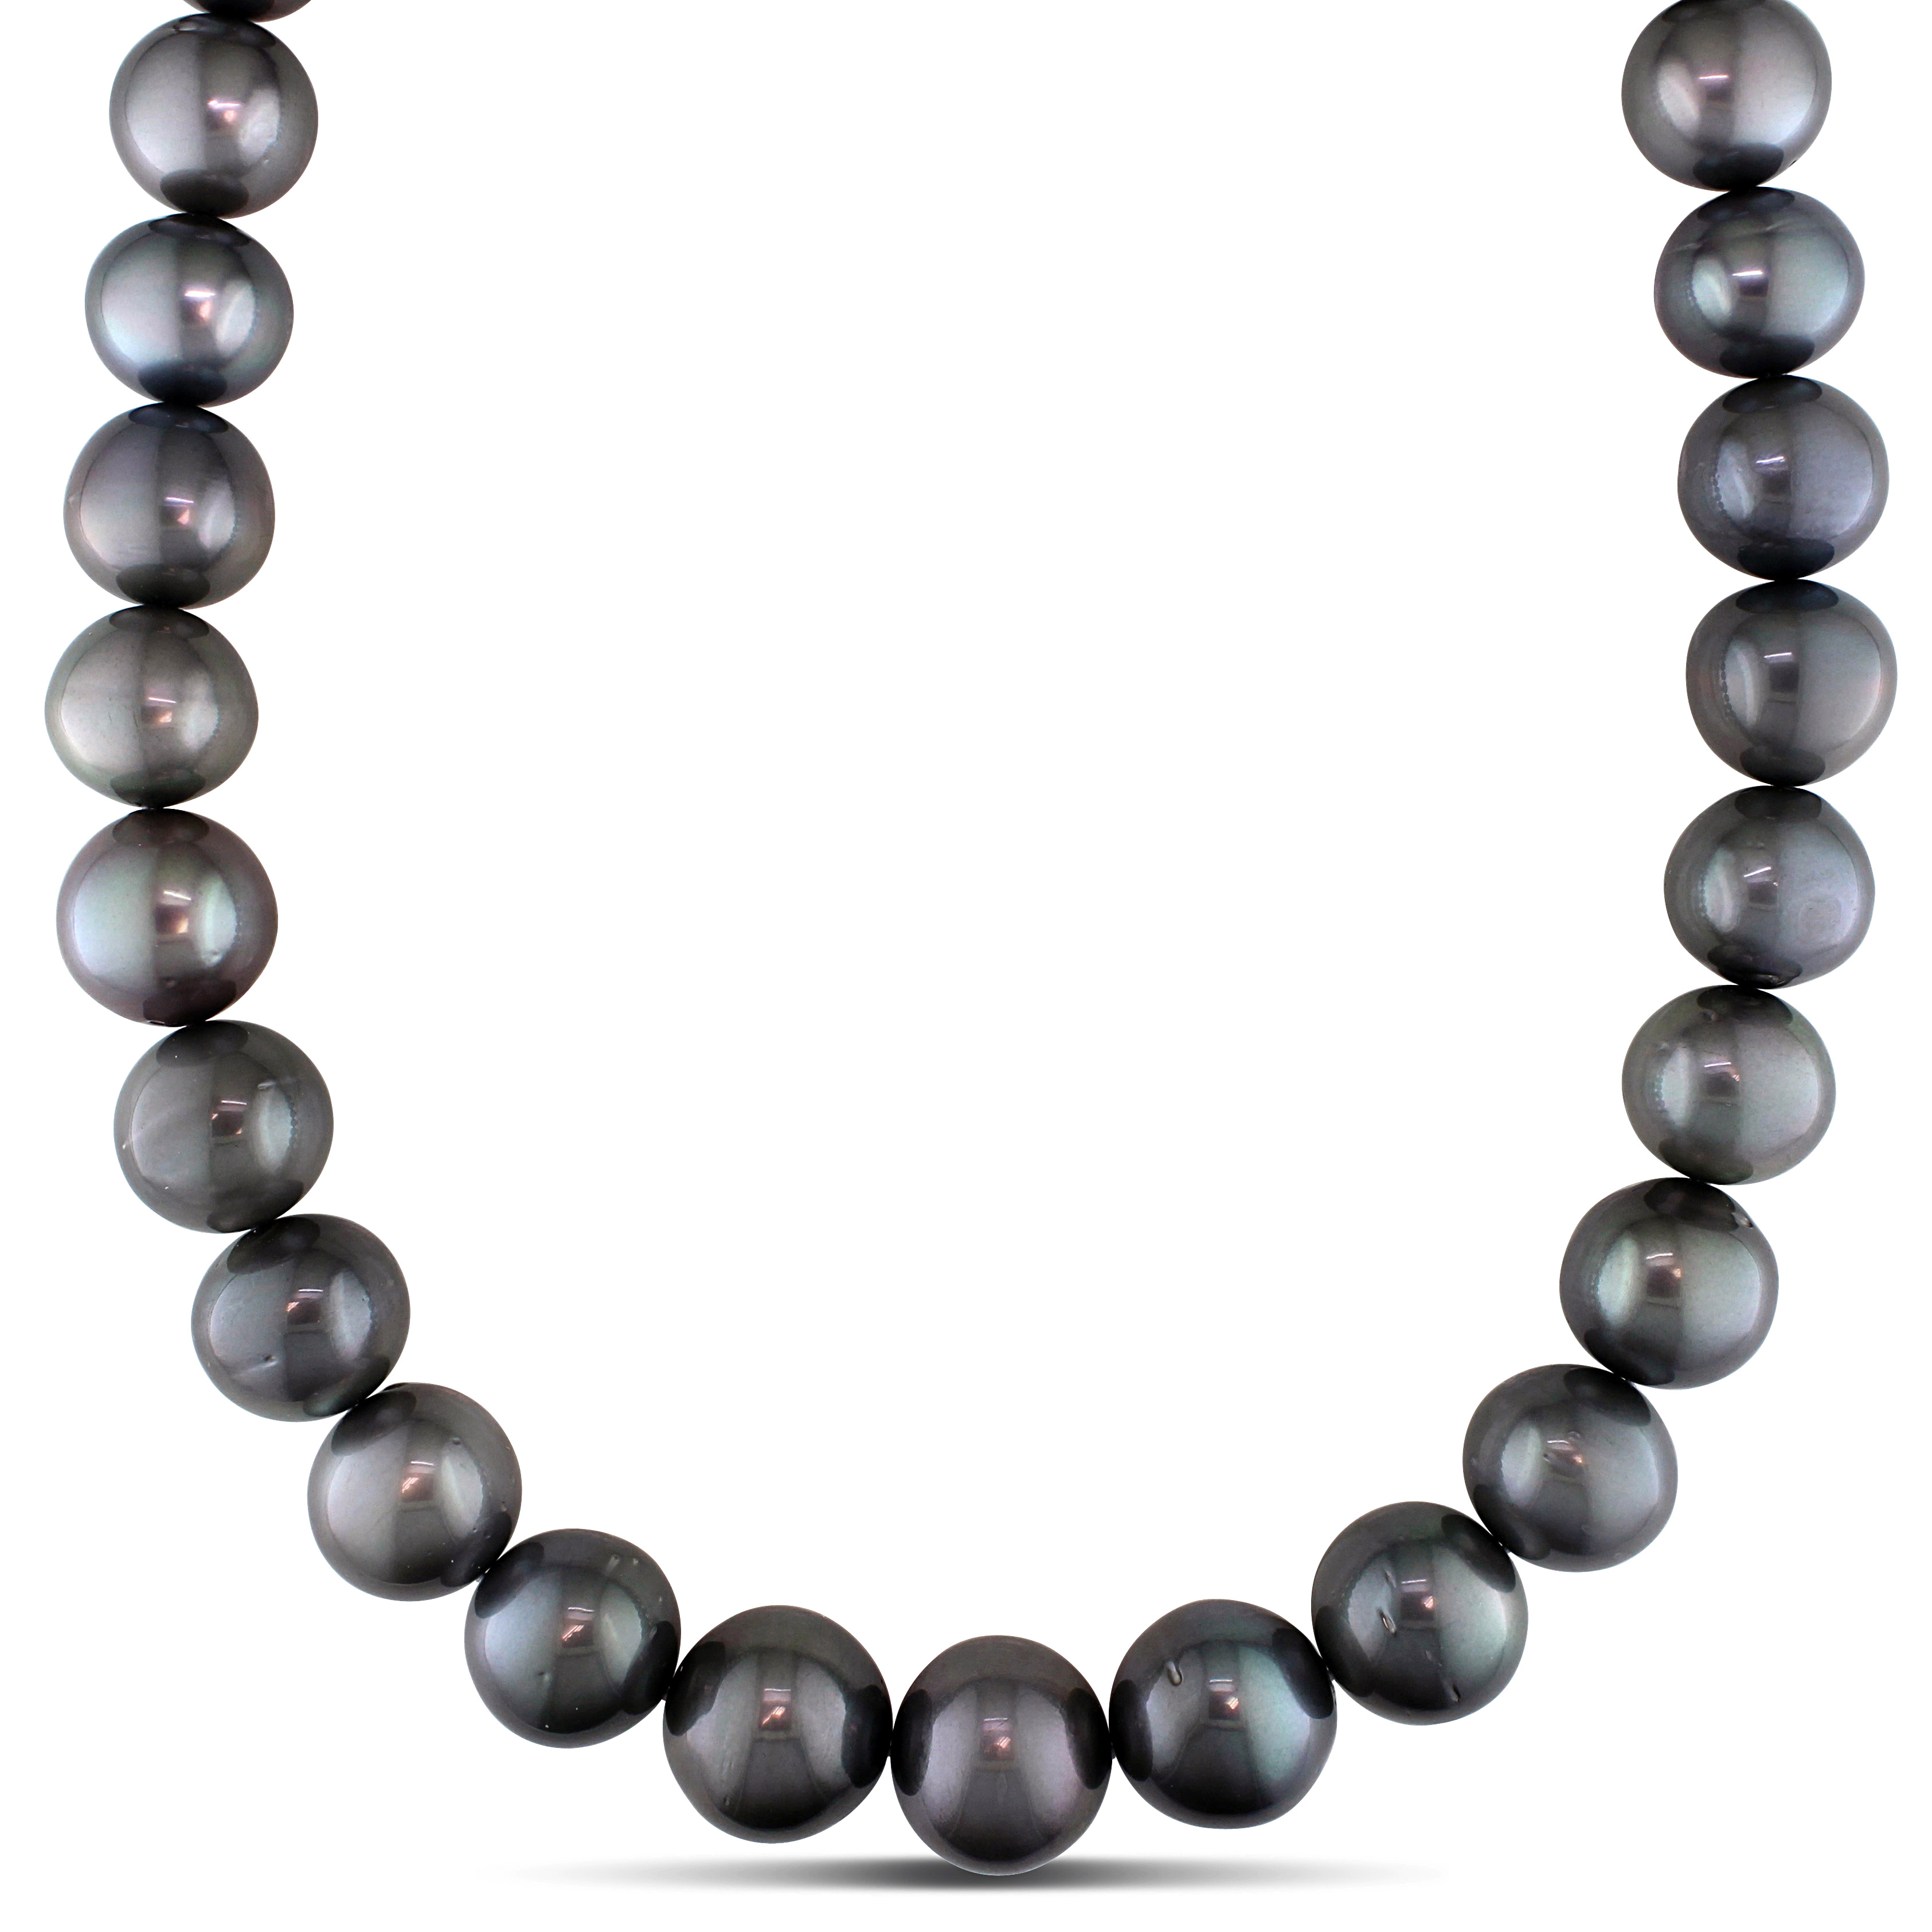 15-18 MM Black Tahitian Pearl Necklace with Diamond Accent Ball Clasp in 14k White Gold - 18 in